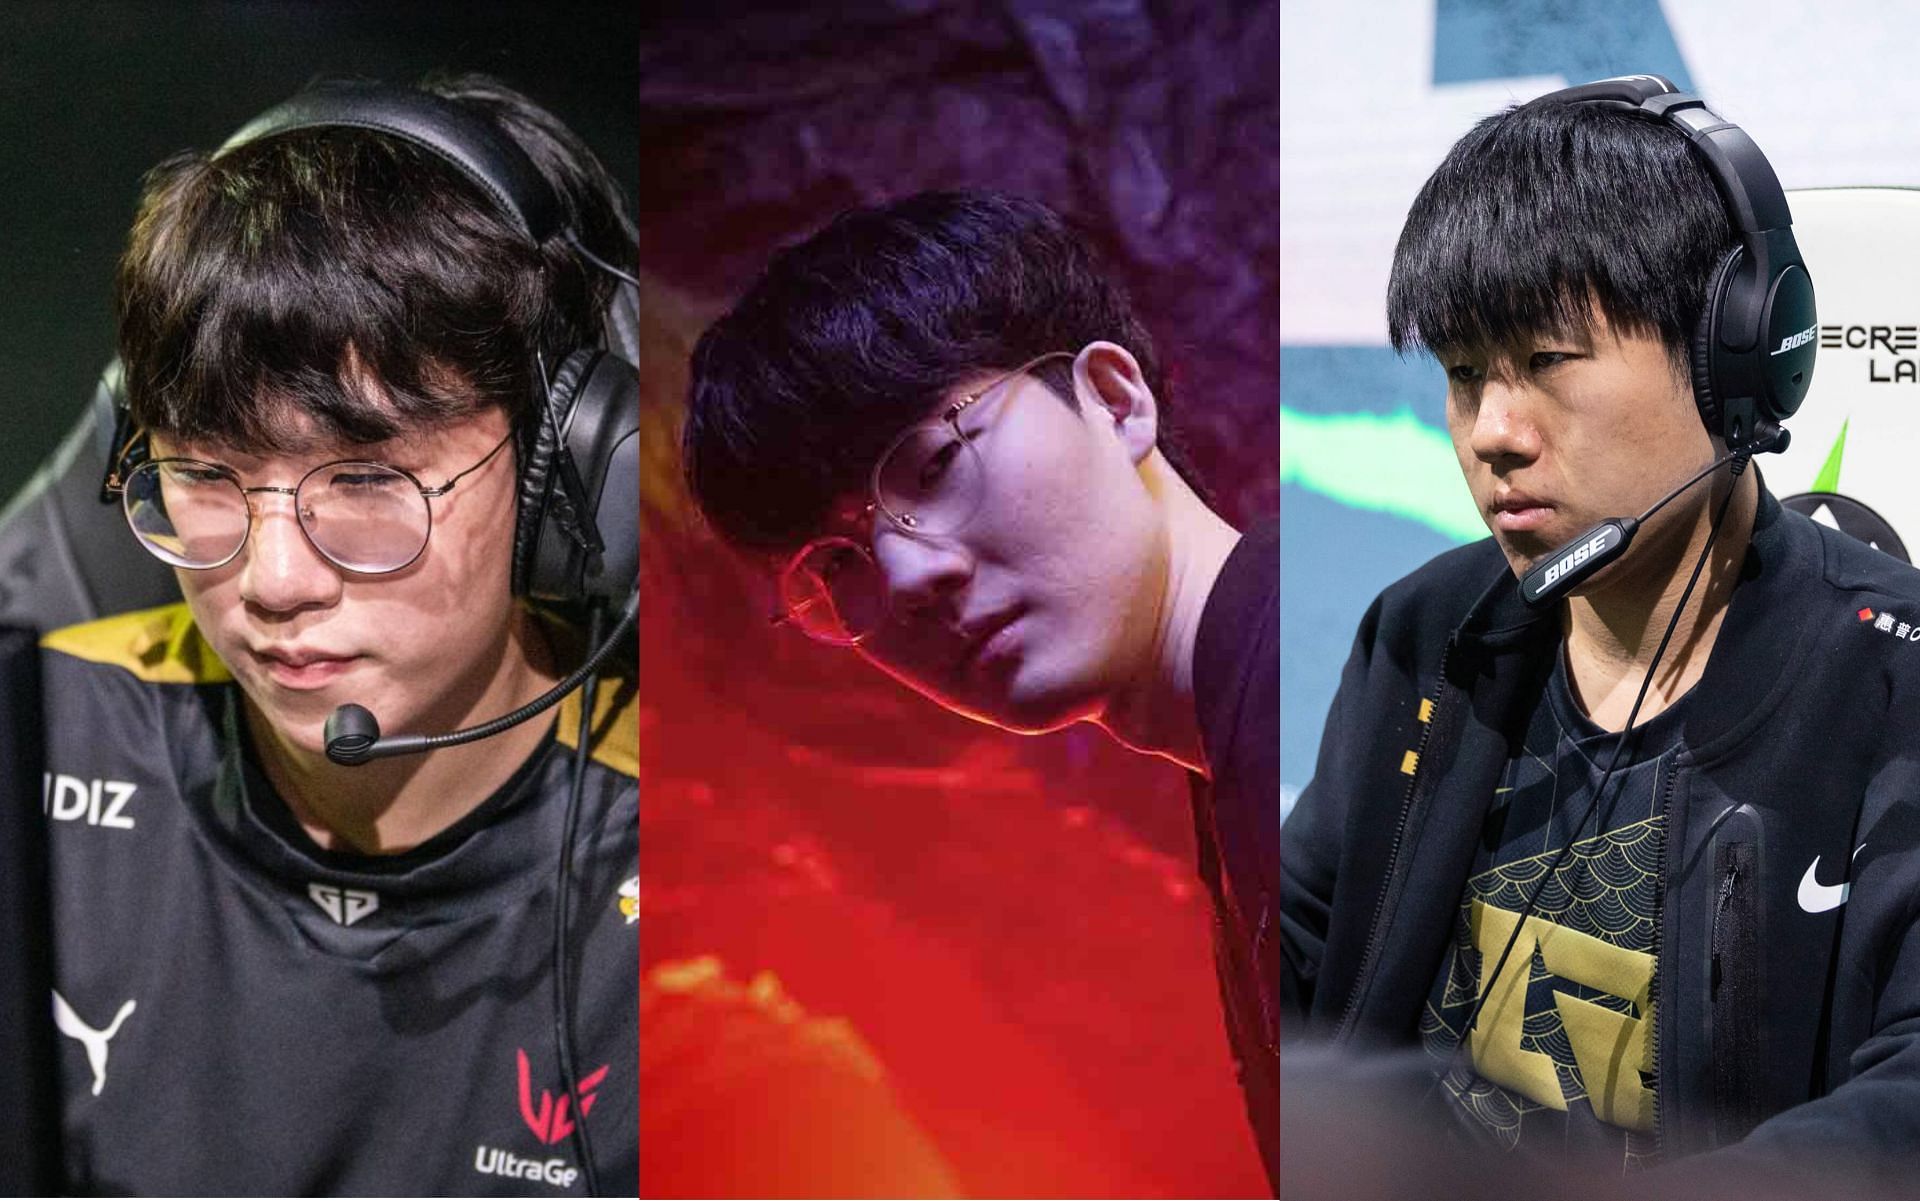 Here come the stars 5 best ADC players at League of Legends Worlds 2022